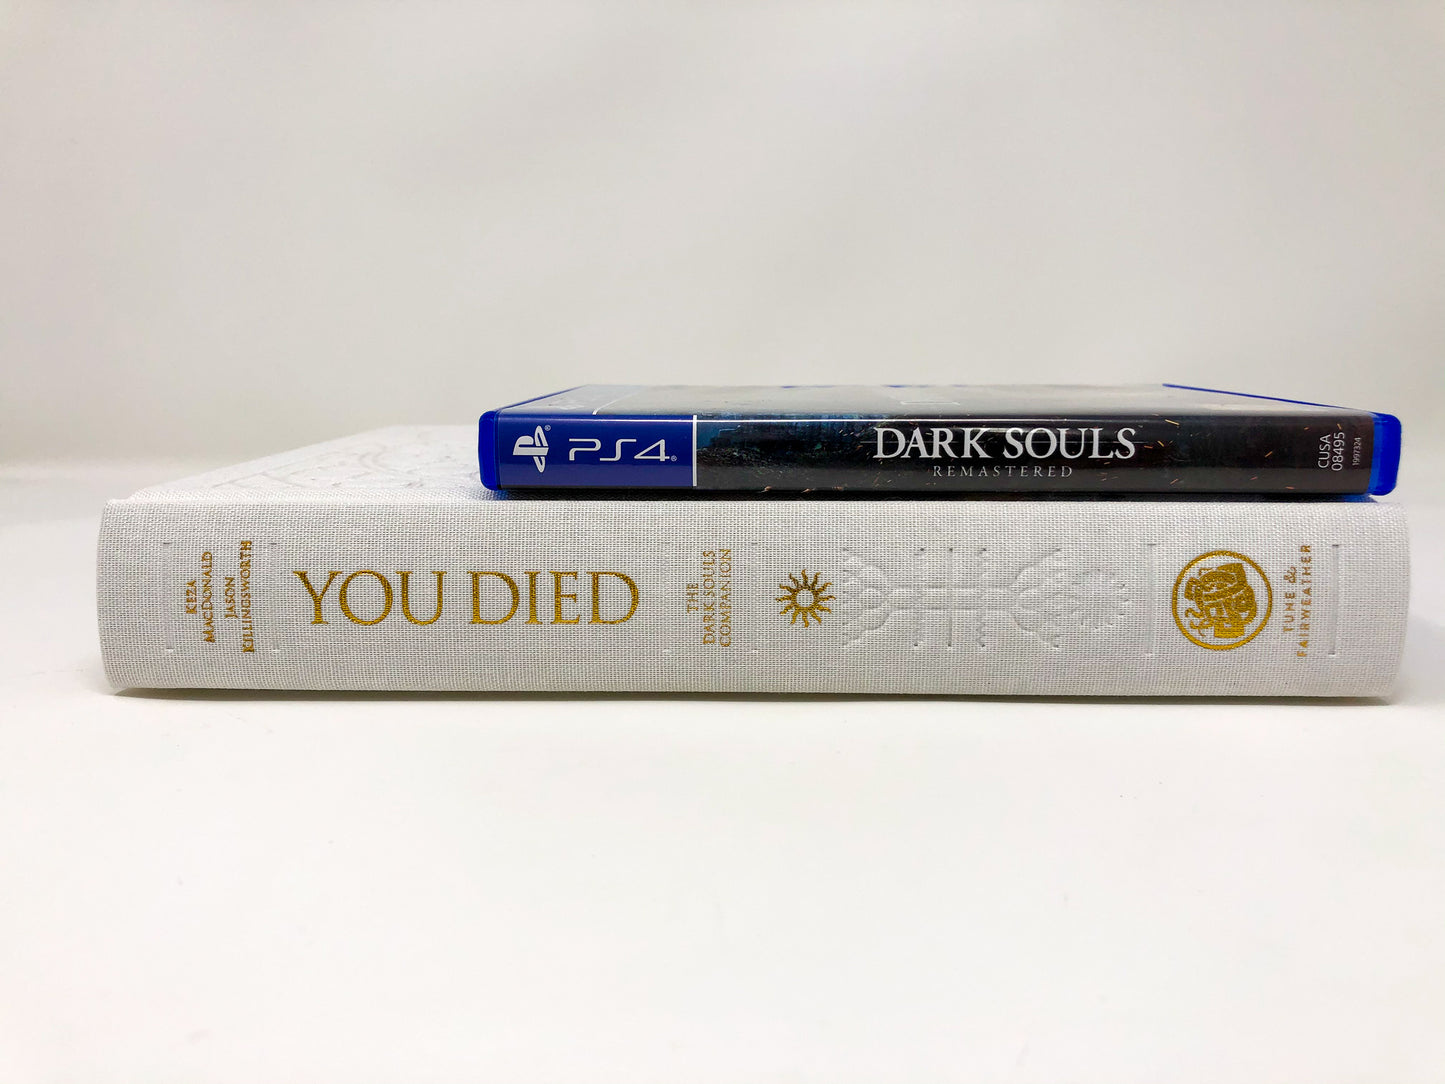 You Died: The Dark Souls Companion ("Way of White" edition)